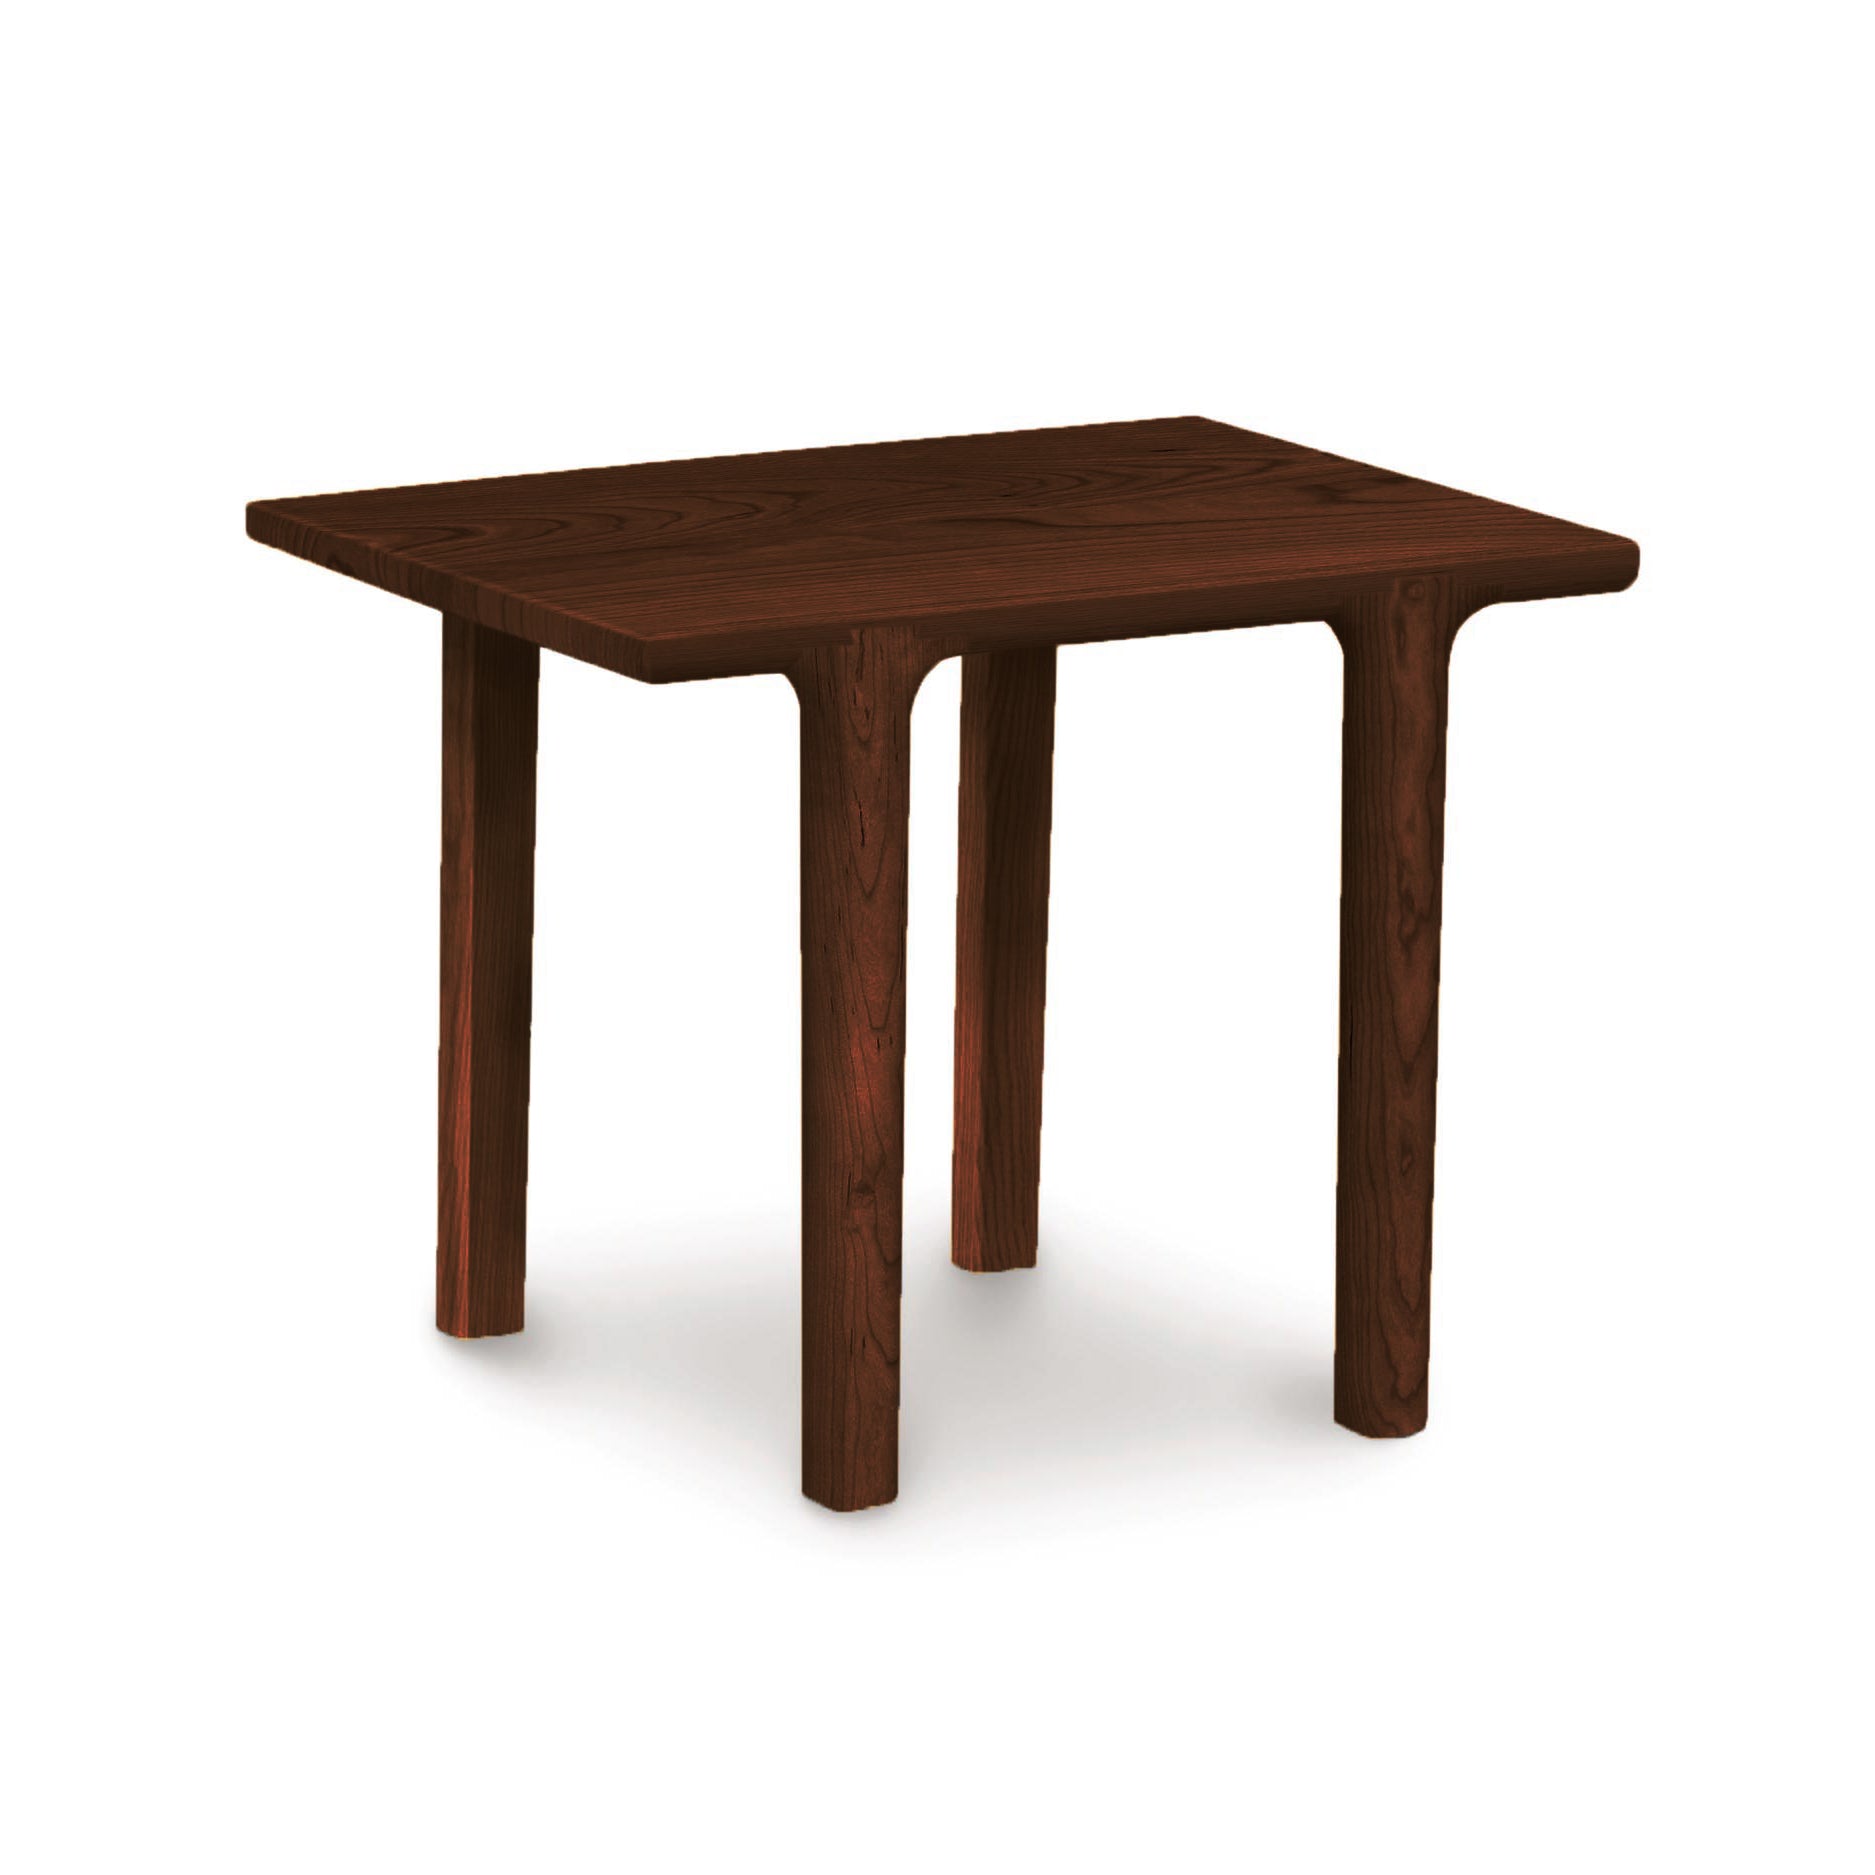 The Copeland Furniture Sierra Rectangular End Table is a small side table with a modern personality. It features two legs, providing sturdy support for its wooden top.